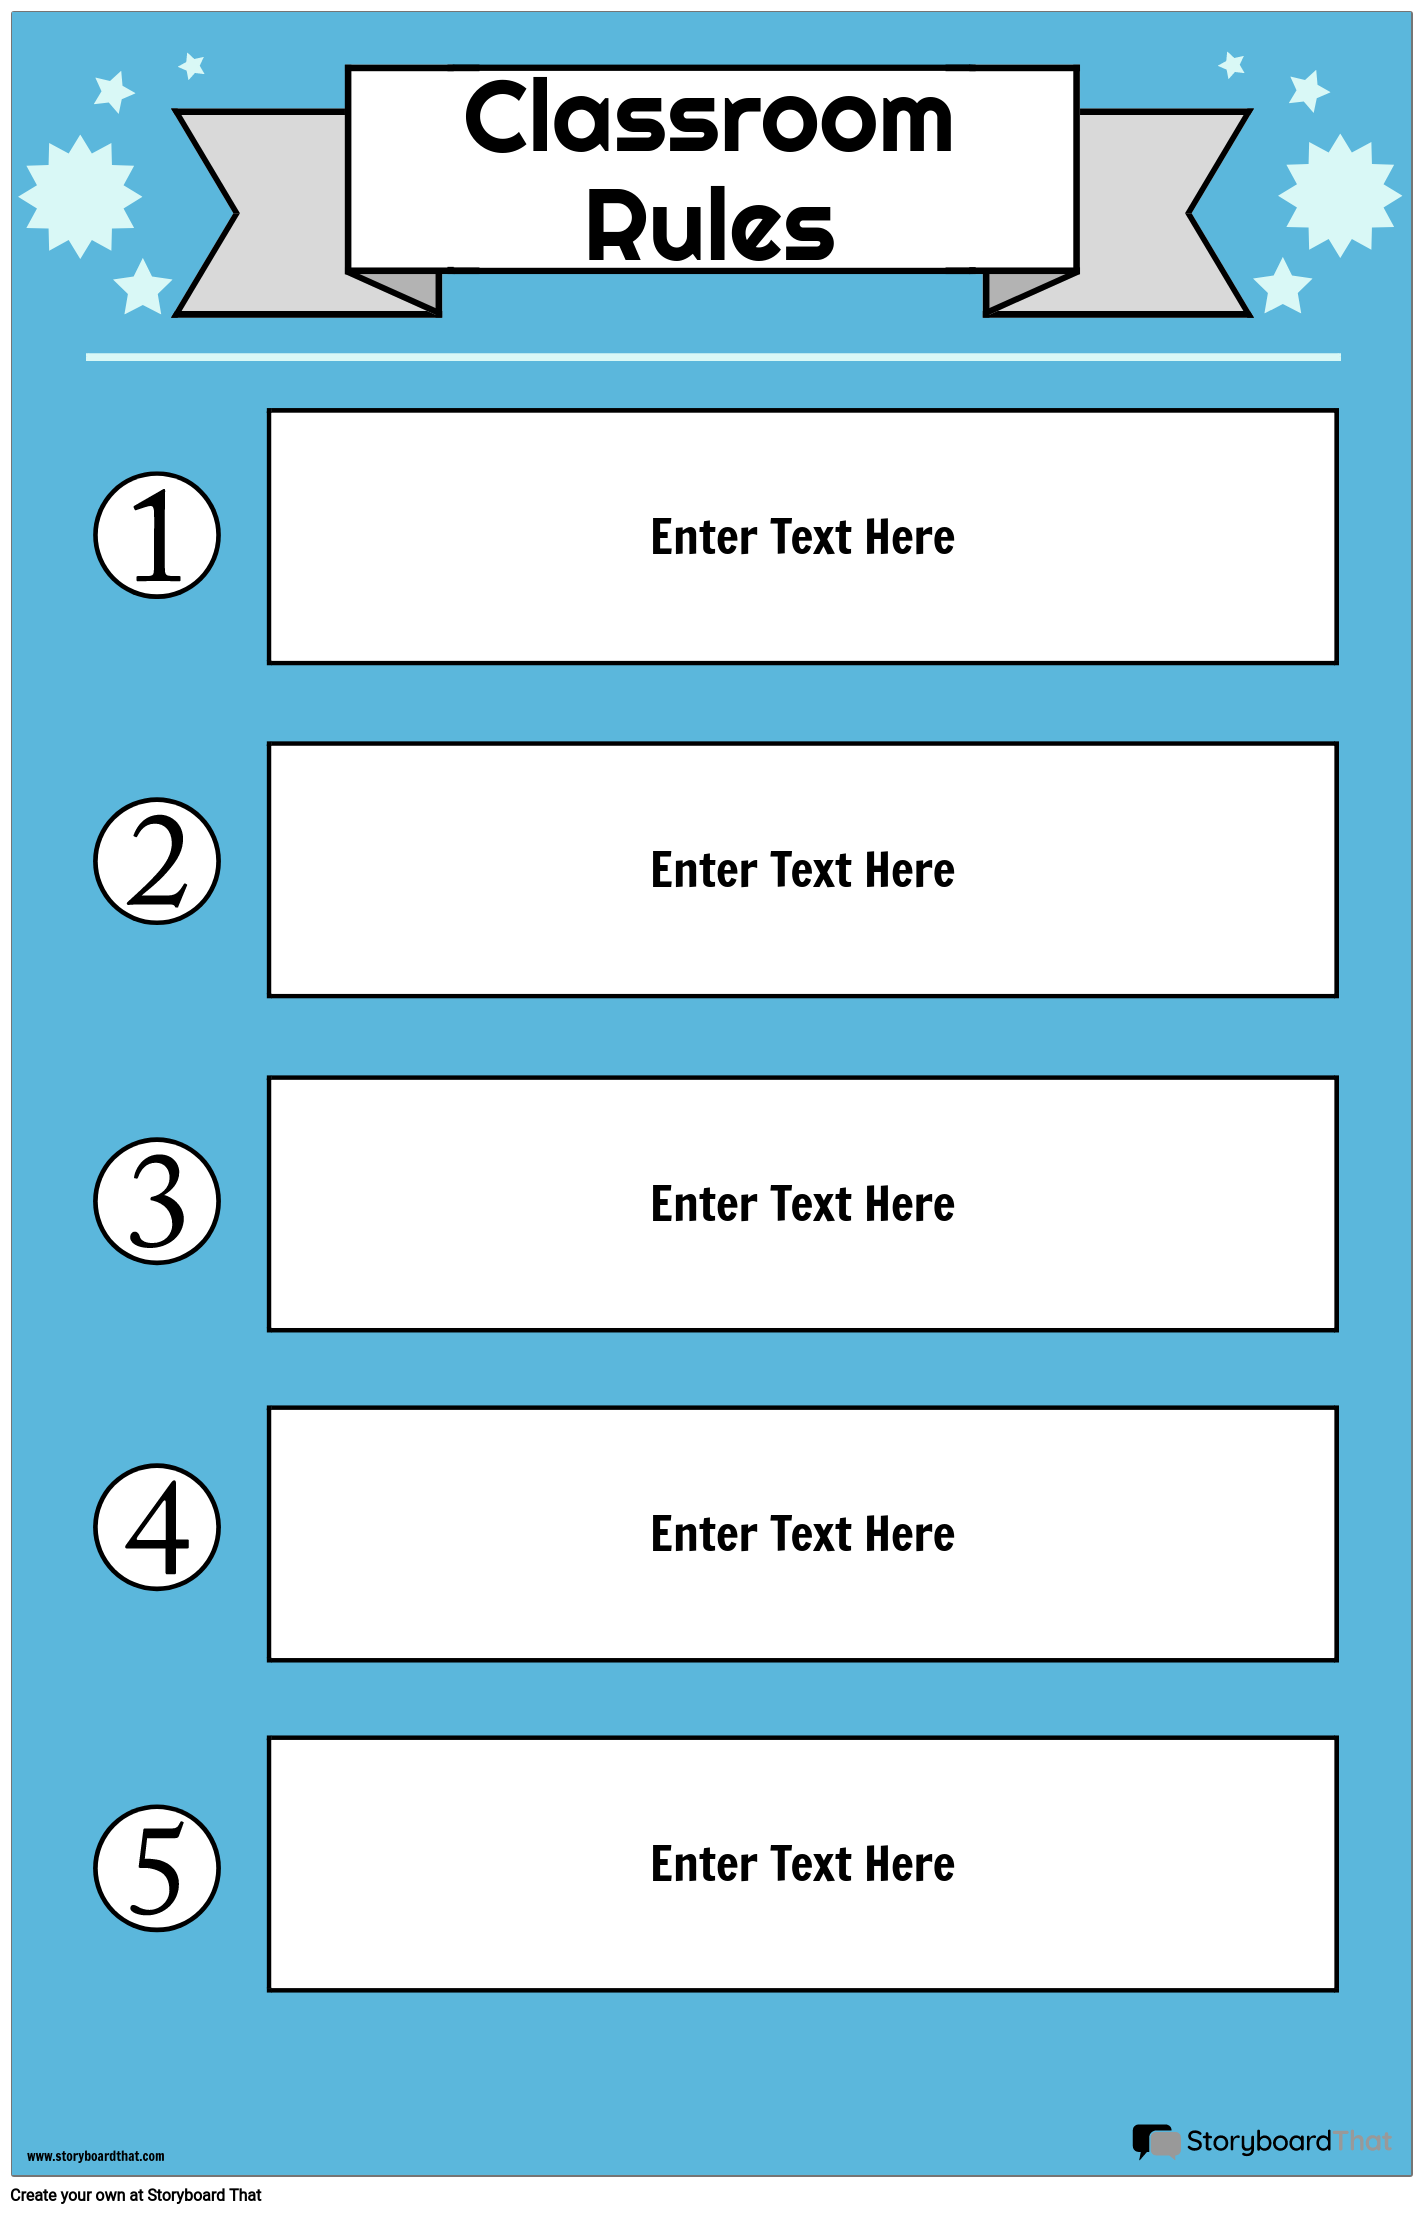 classroom-rules-poster-template-free-jenwiles